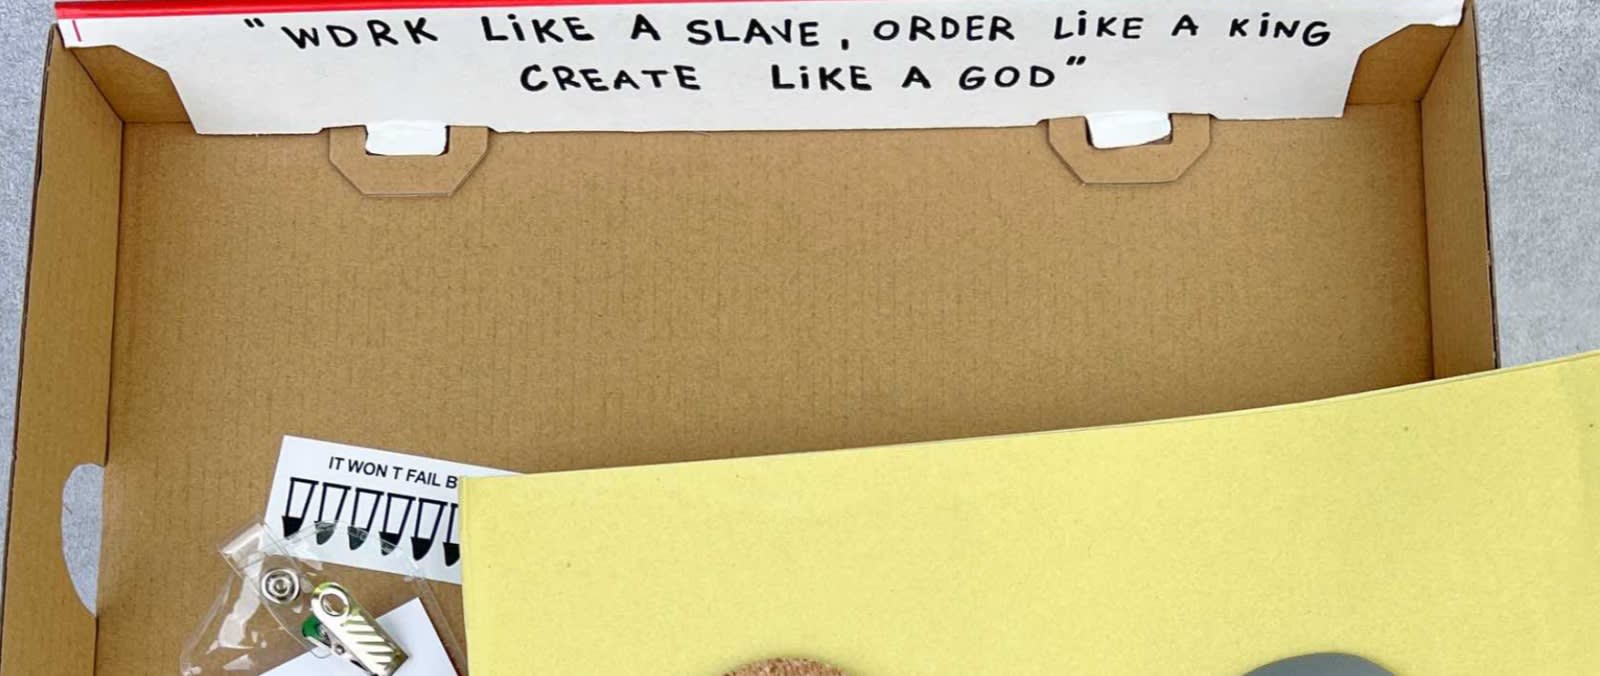 Nike Covered Up a Reference to Slave Work on Tom Sachs Sneaker Box in 2017